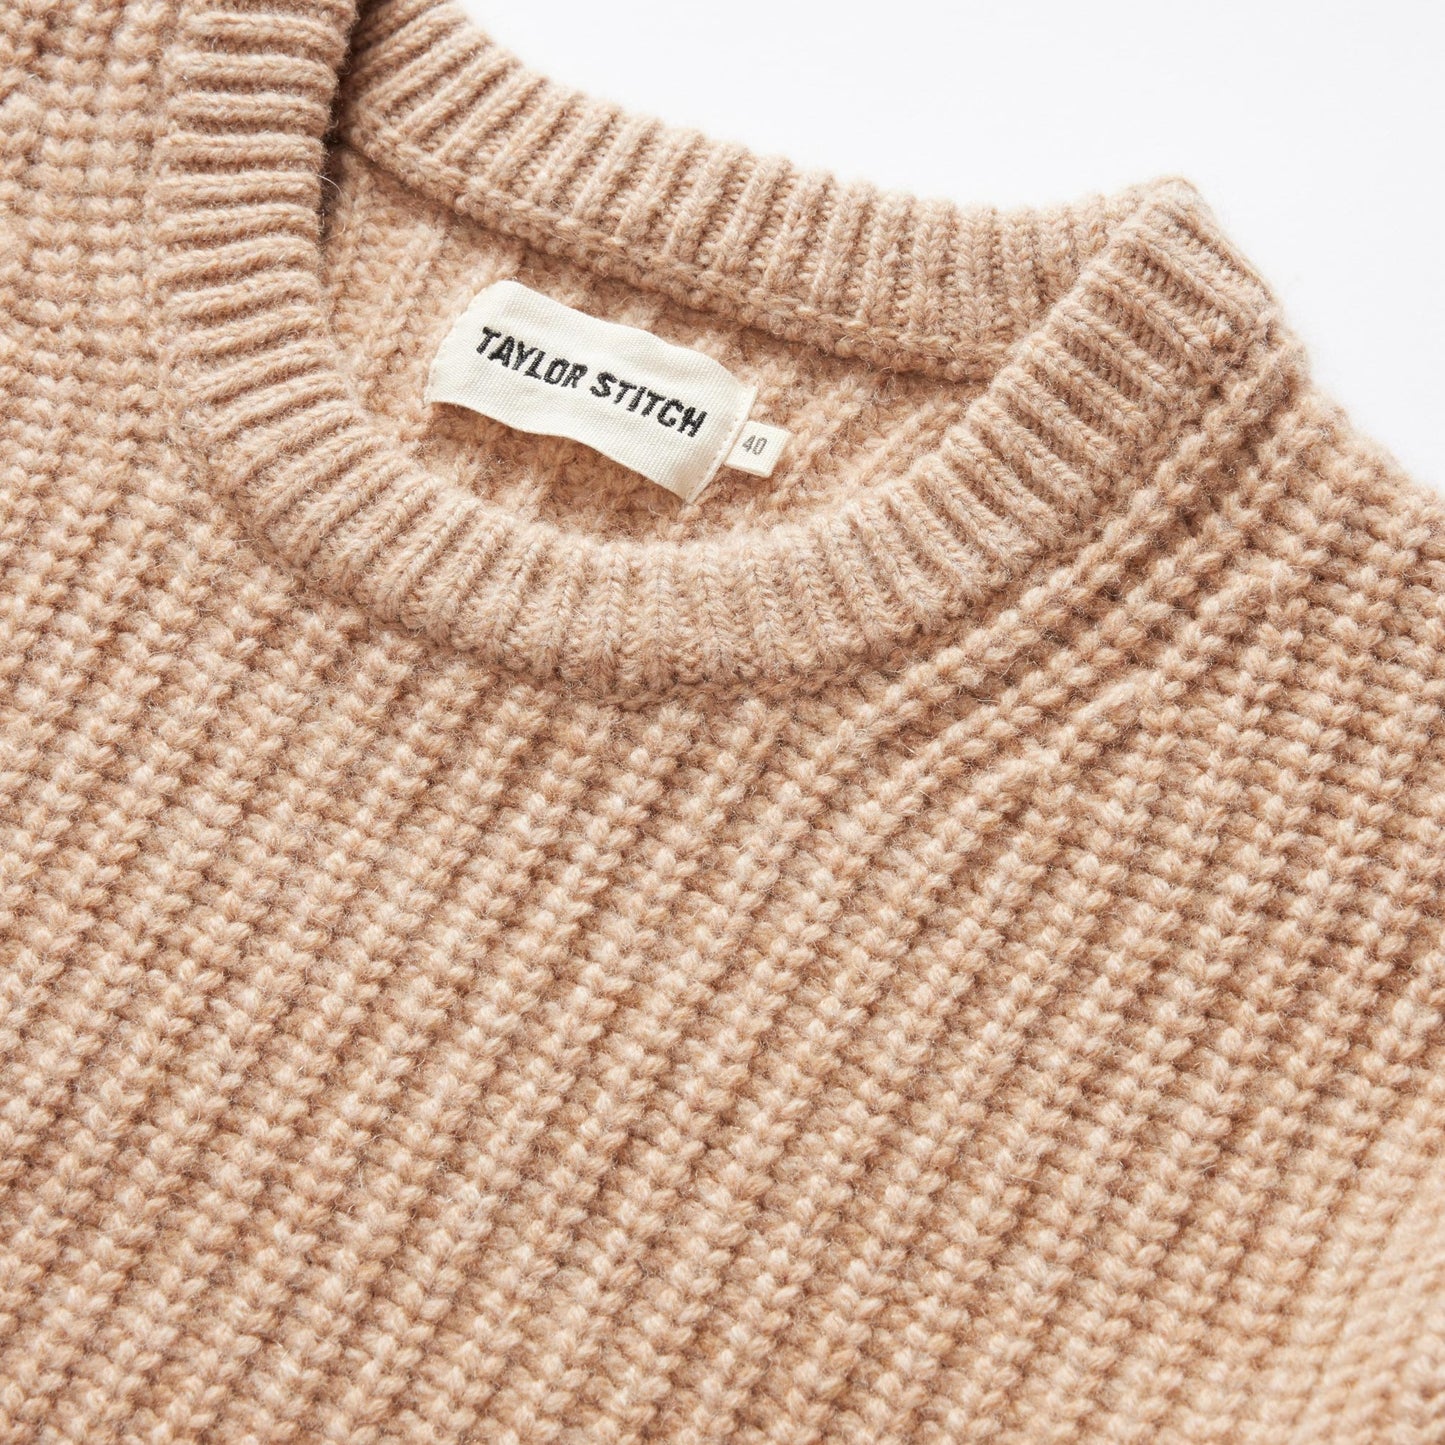 Taylor Stitch - Fisherman Sweater in Camel